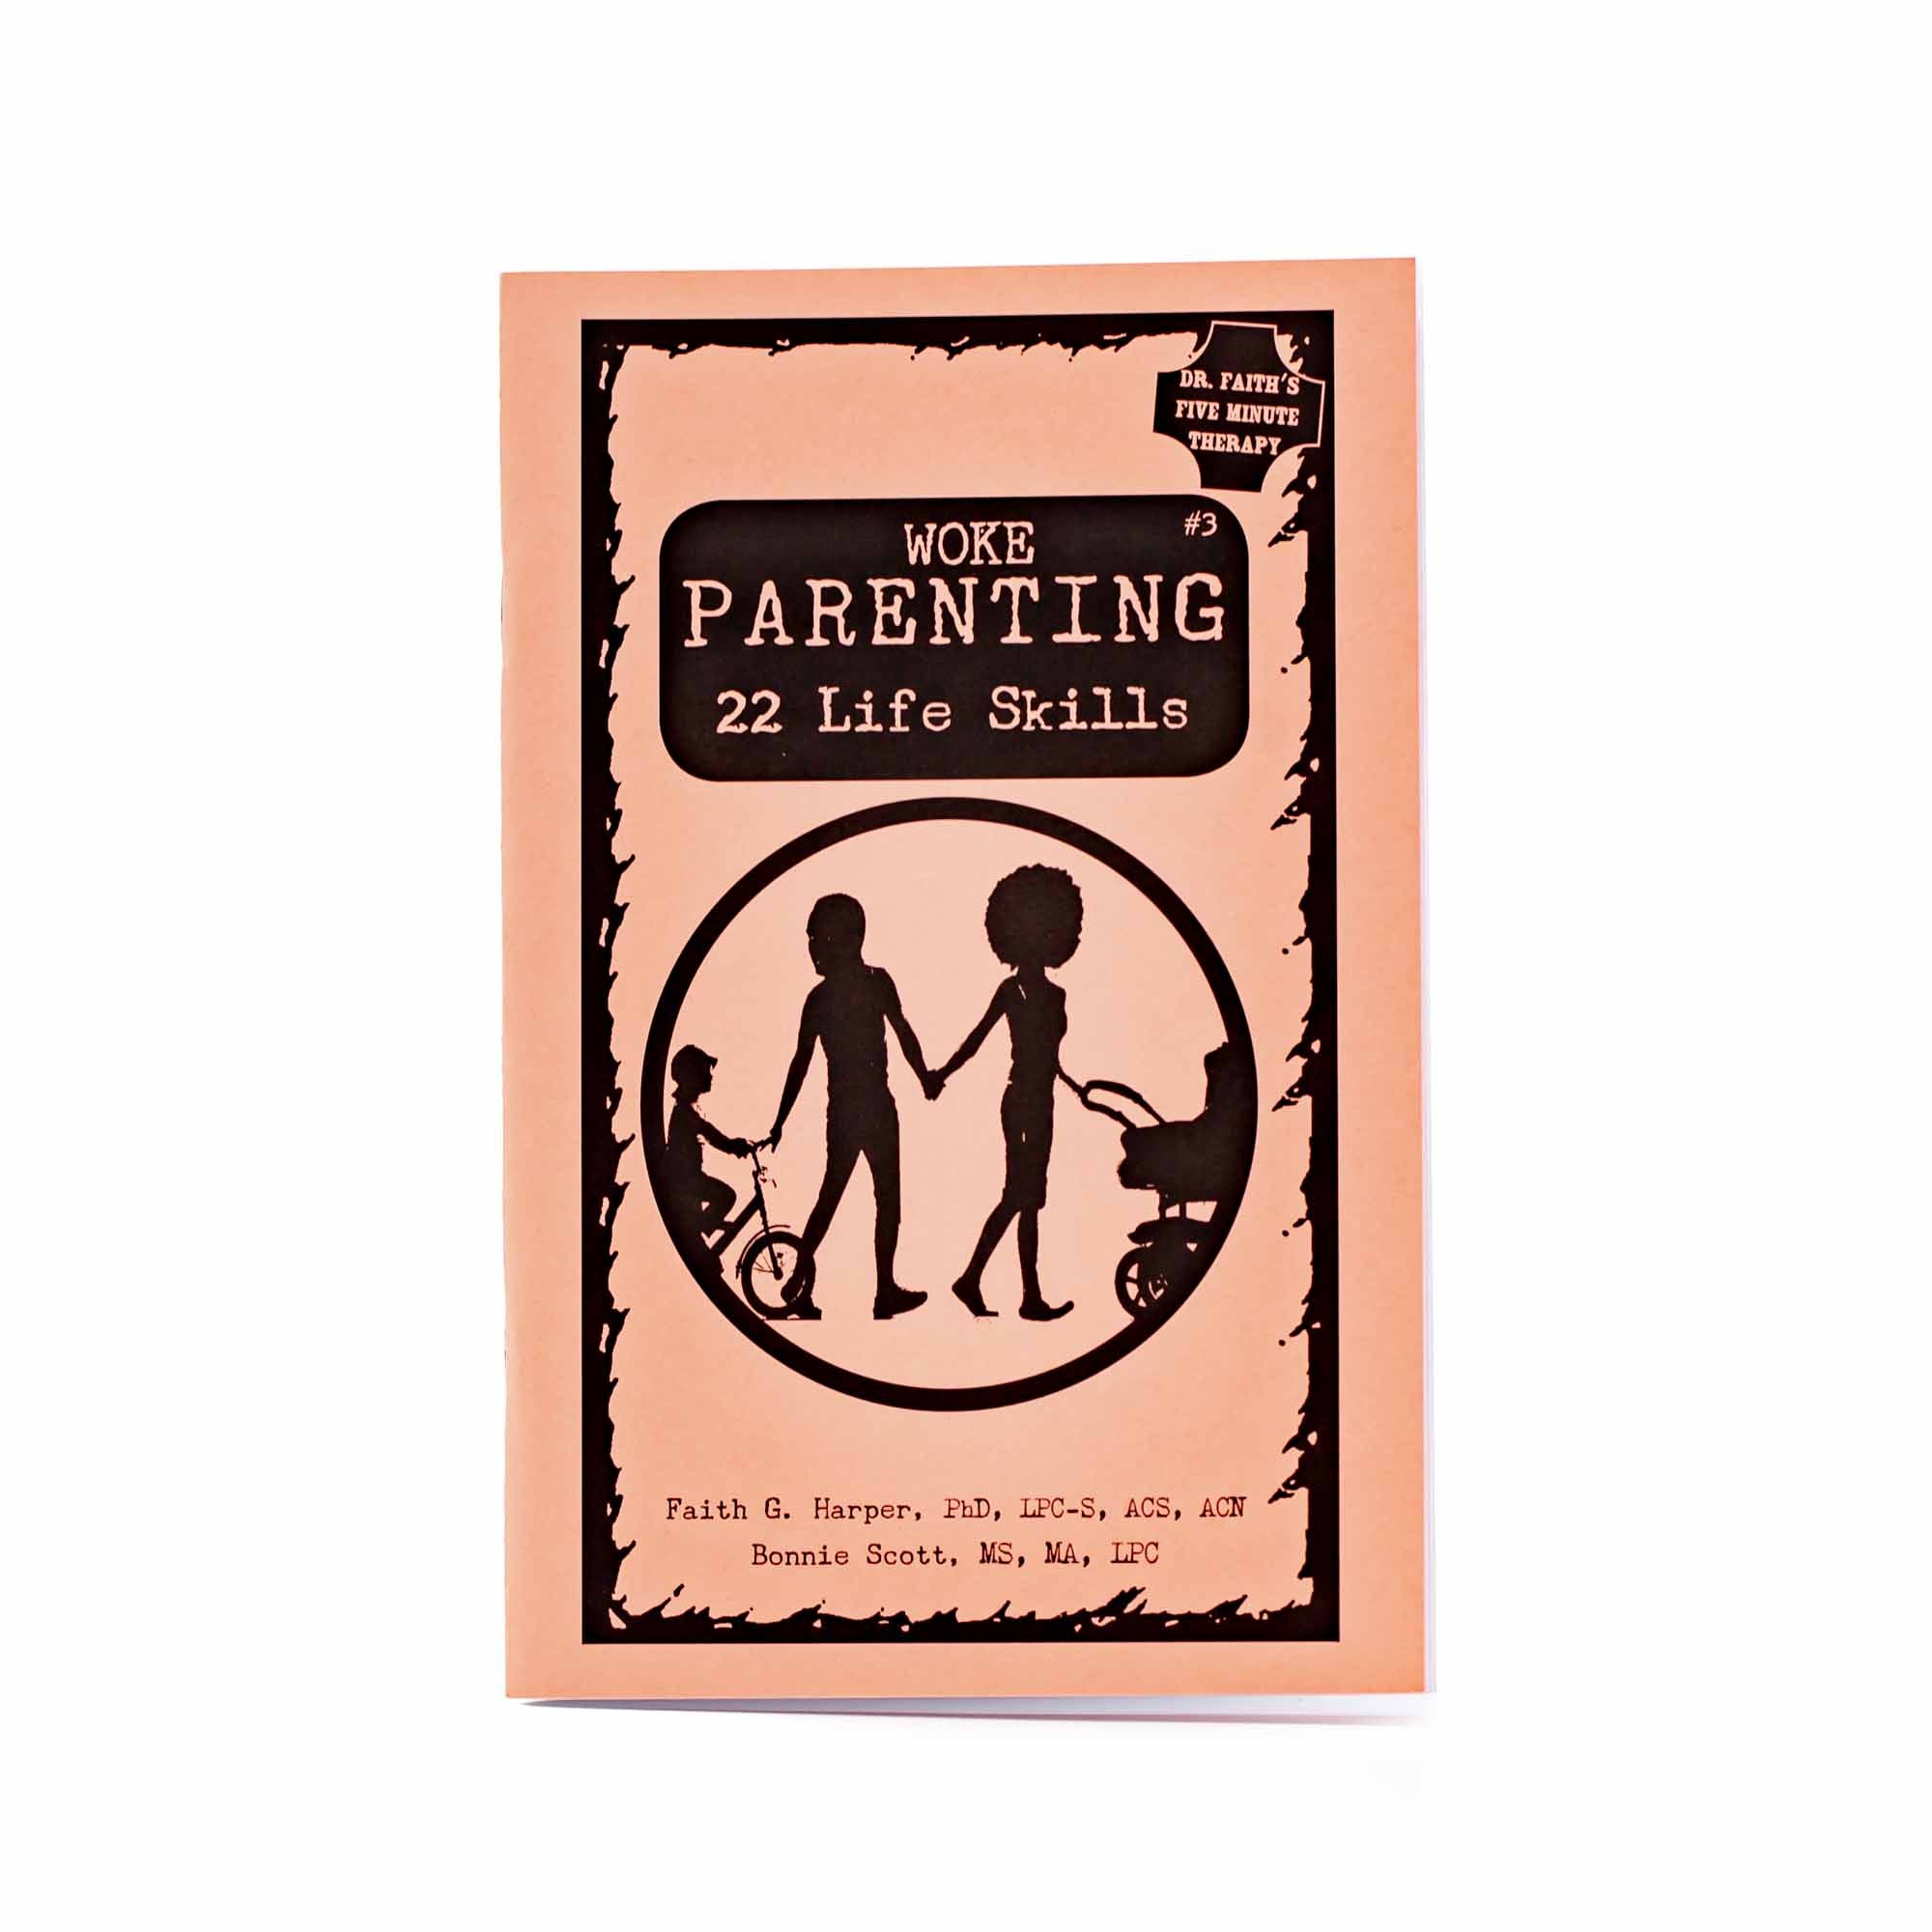 Woke Parenting #3 - Life Skills by Faith G. Harper - Mortise And Tenon